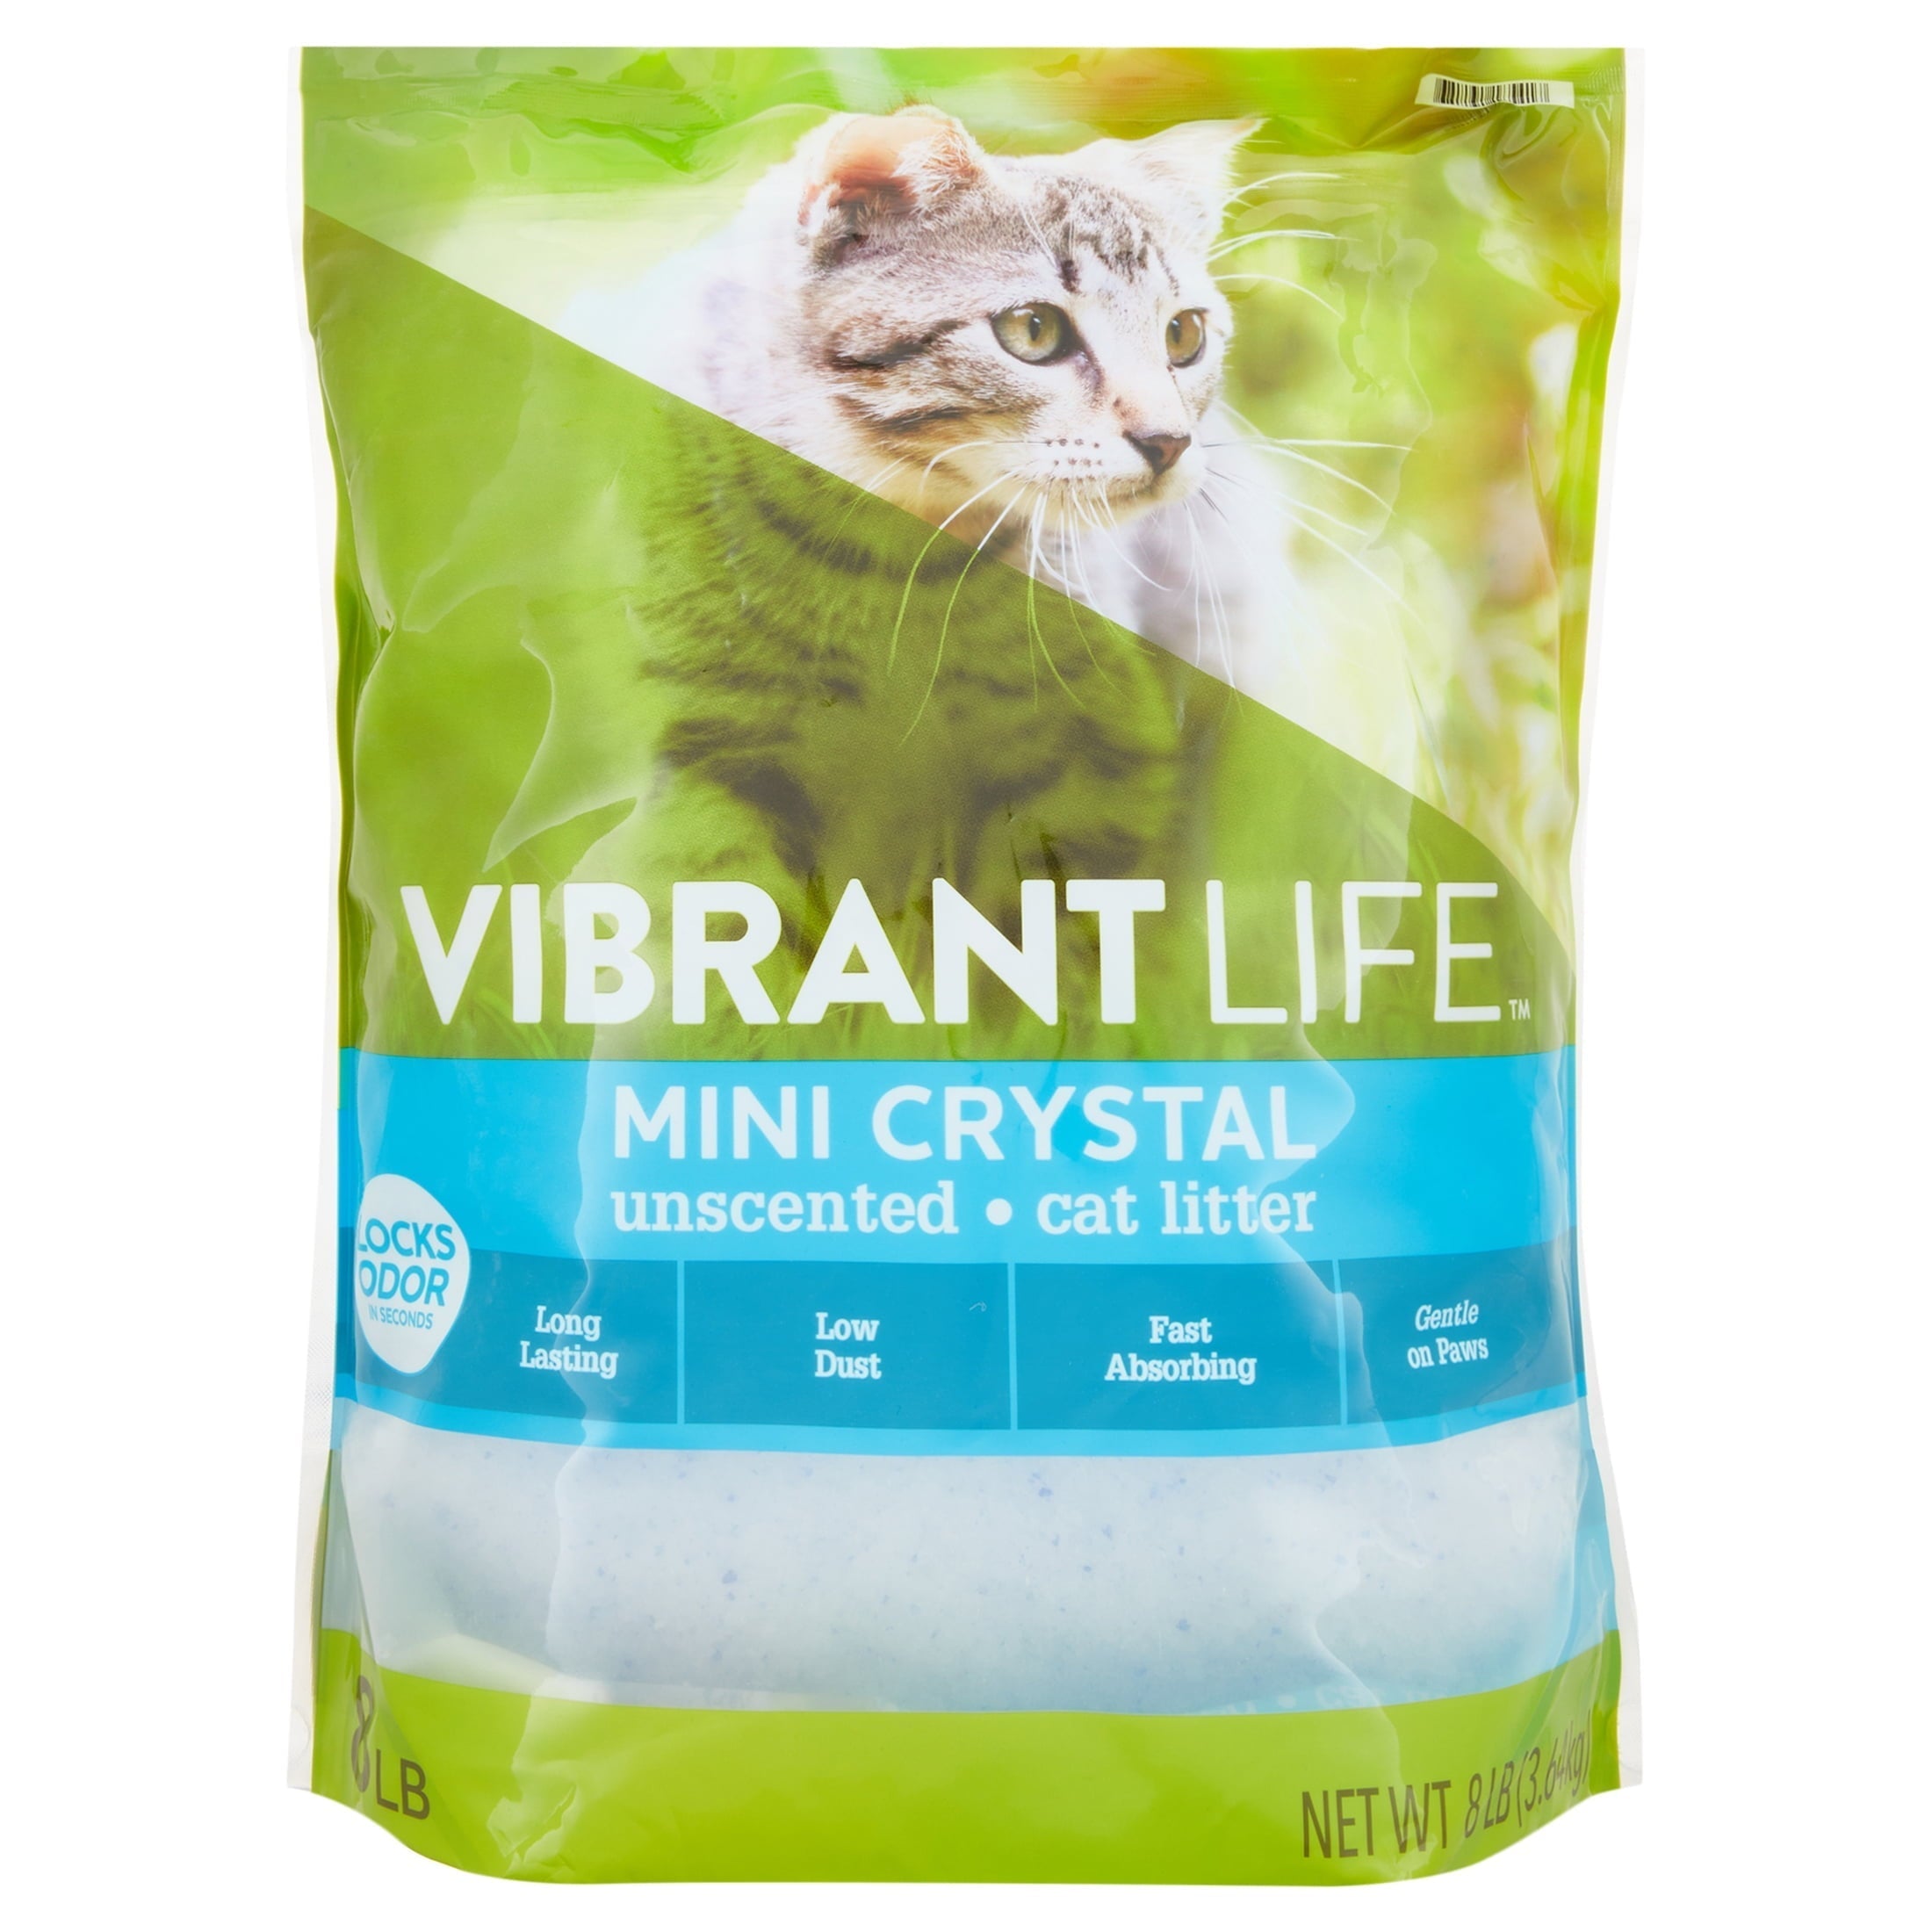 Wholesale prices with free shipping all over United States Vibrant Life Mini Crystal Unscented Cat Litter, 8 lb - Steven Deals